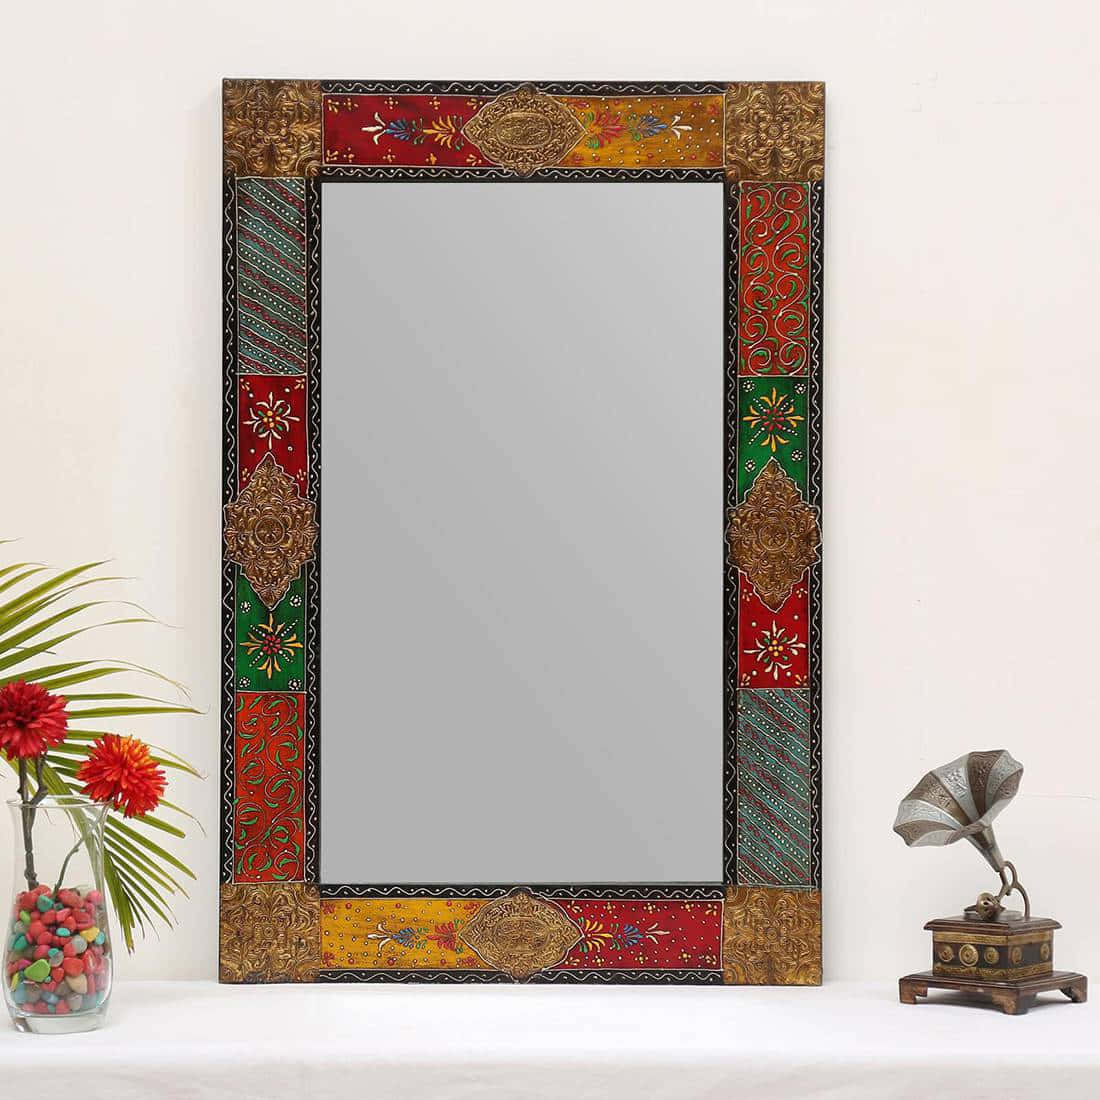 A Colorful Mirror With A Flower And Vase